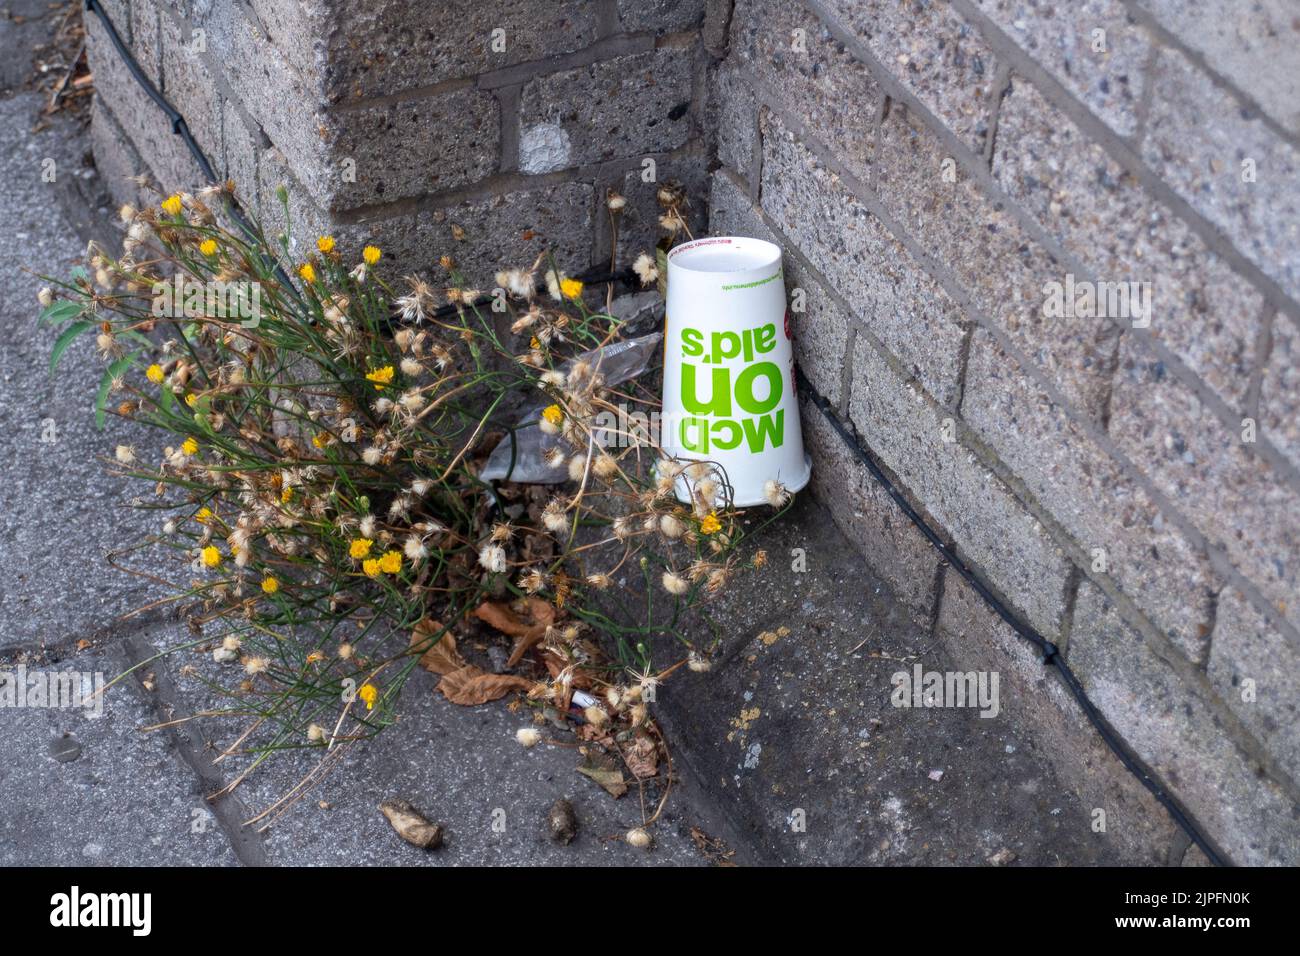 Slough, Berkshire, UK. 17th August, 2022. McDonald's litter discarded by customers is a common sight in Slough. Credit: Maureen McLean/Alamy Stock Photo